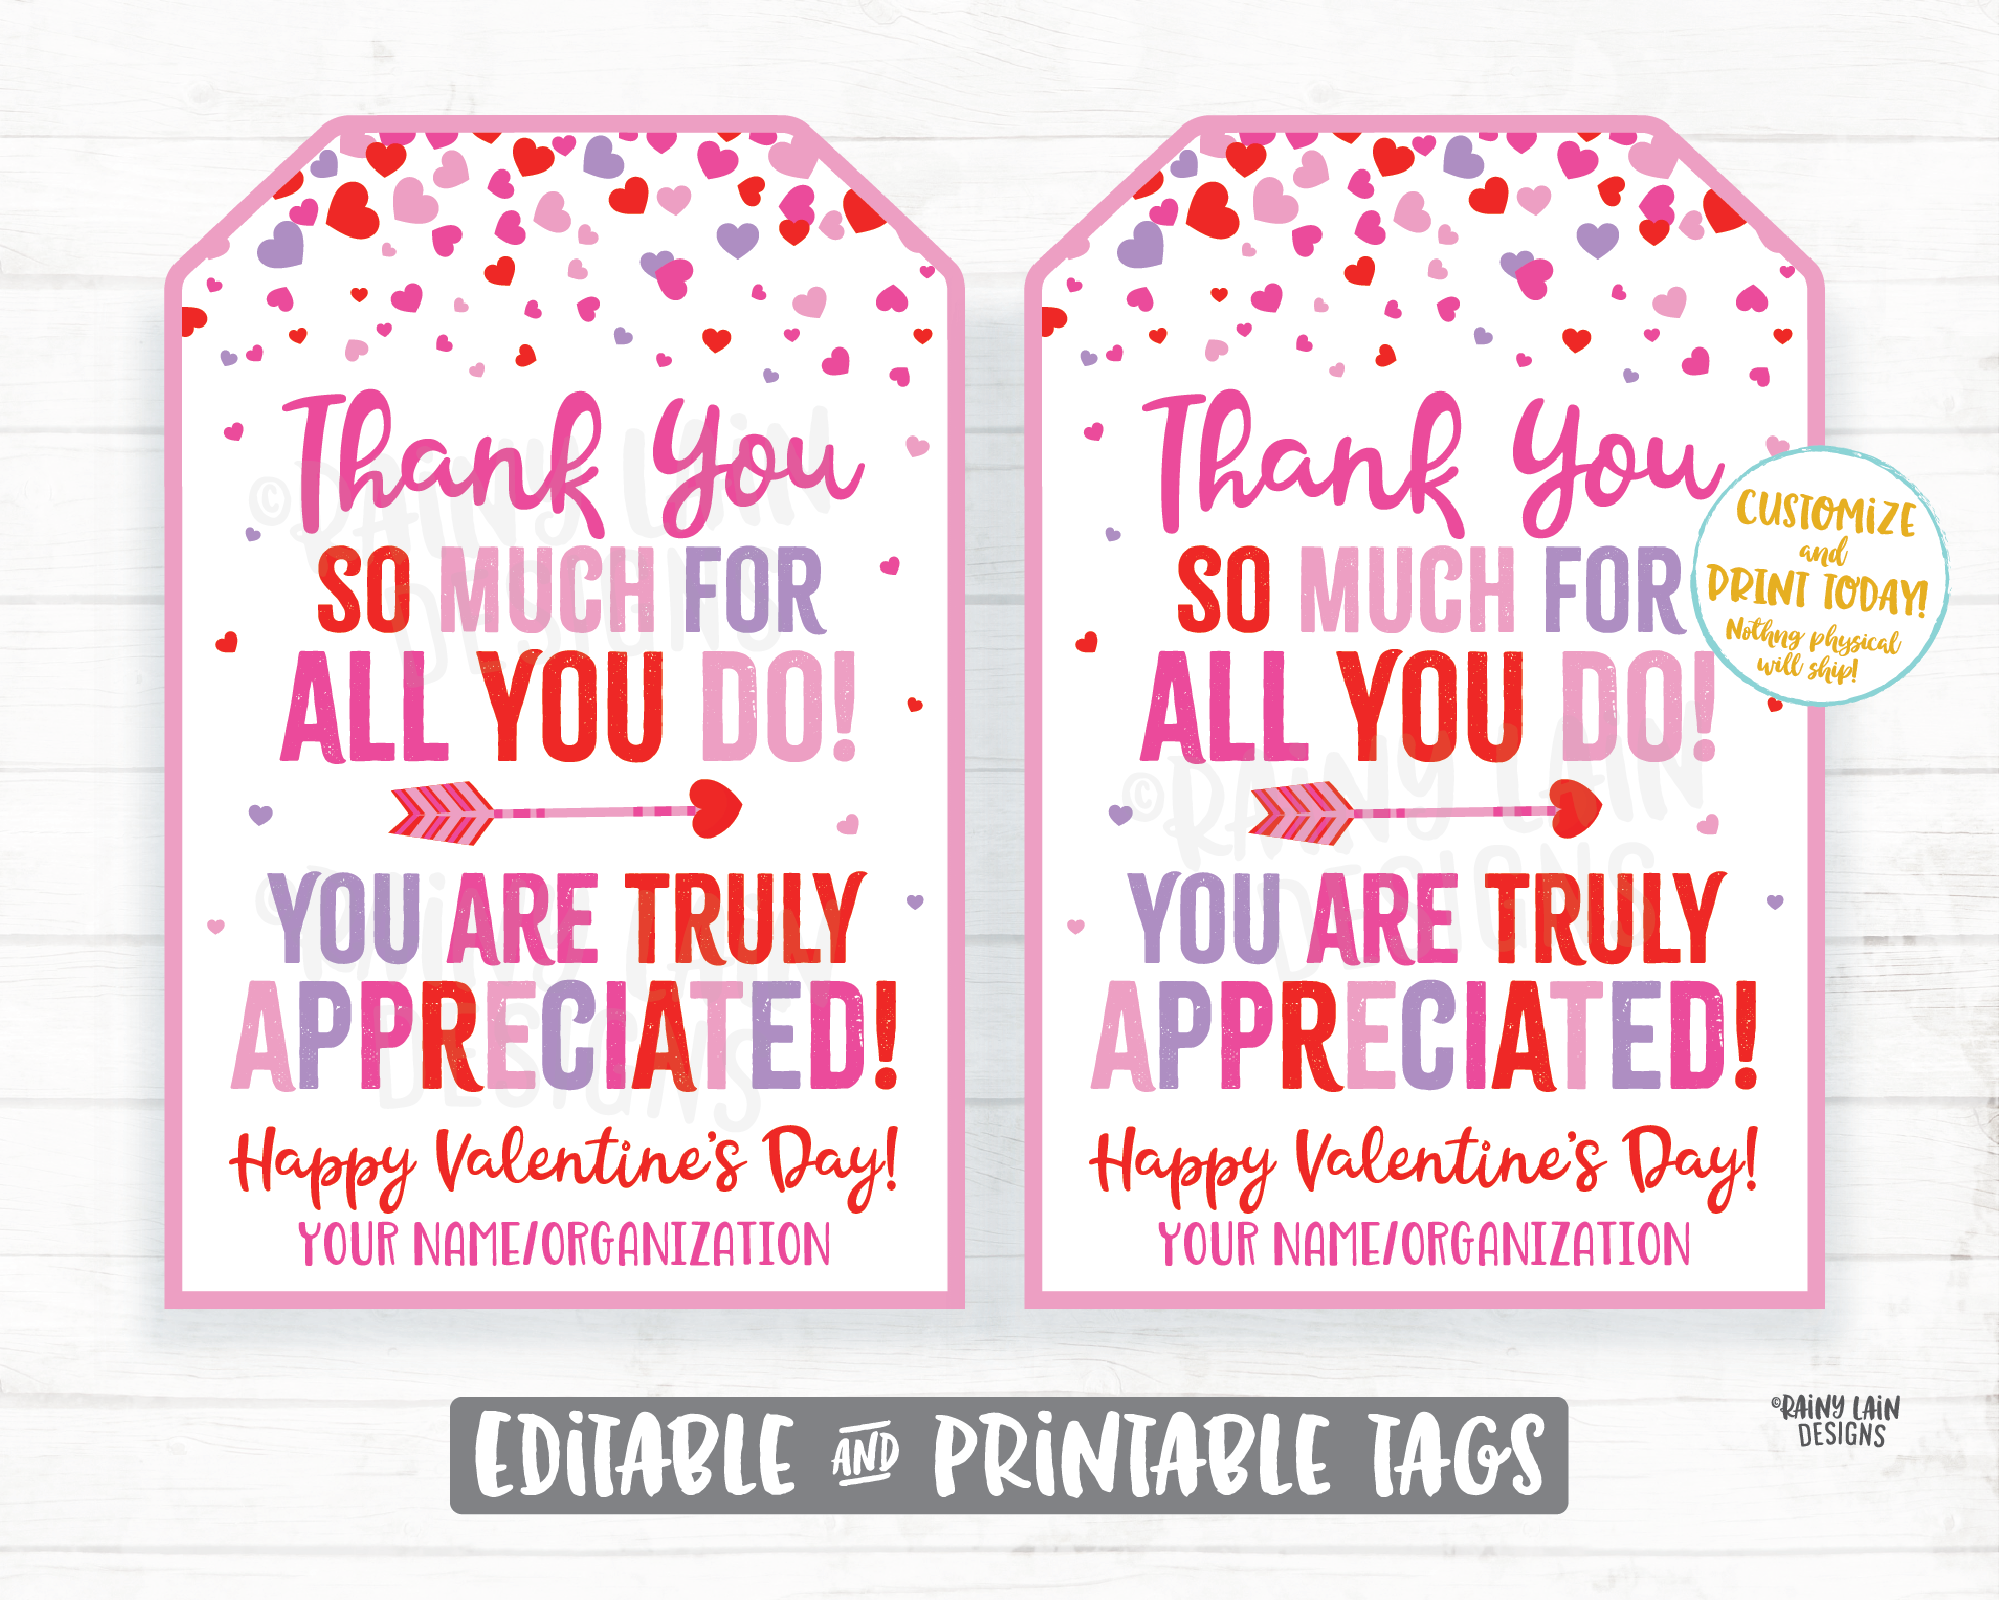 Thank You for all you do Valentine's Day Gift Tag Staff Appreciation Friend Co-Worker Company Frontline Worker Employee Teacher Principal